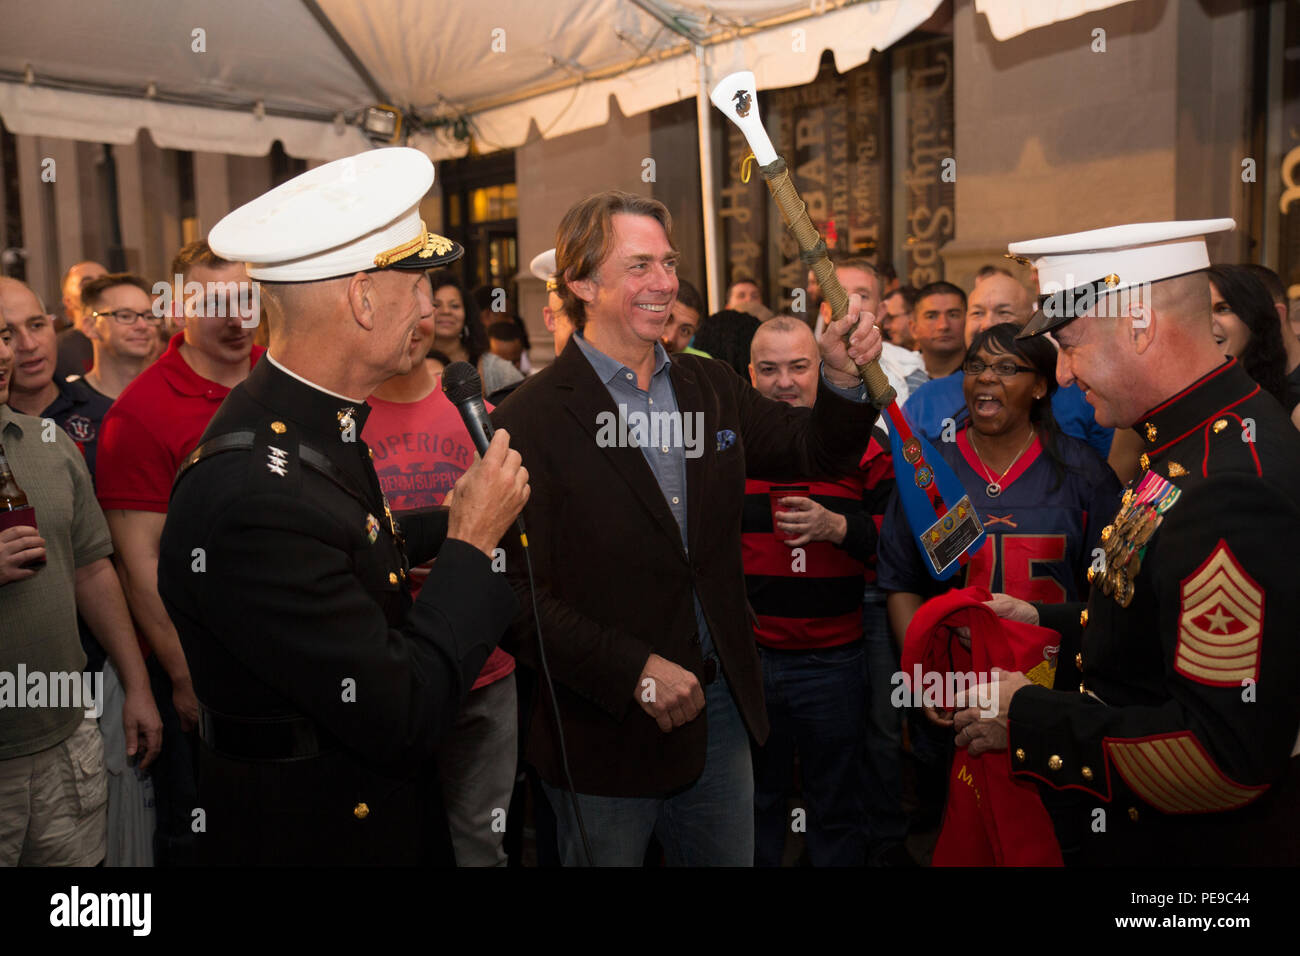 Lt. Gen. Rex C. McMillian (left), commander of Marine Forces Reserve, and Sgt. Maj. Anthony A. Spadaro (right), sergeant major of MARFORRES, present John Besh, chef and former Marine sergeant, with a commemorative paddle at Luke Restaurant in New Orleans, Nov. 10, 2015. The gift was given to thank Besh for hosting this event at his restaurant to celebrate the 240th Marine Corps Birthday. (U.S. Marine Corps photo by Cpl. Ian Leones/Released) Stock Photo